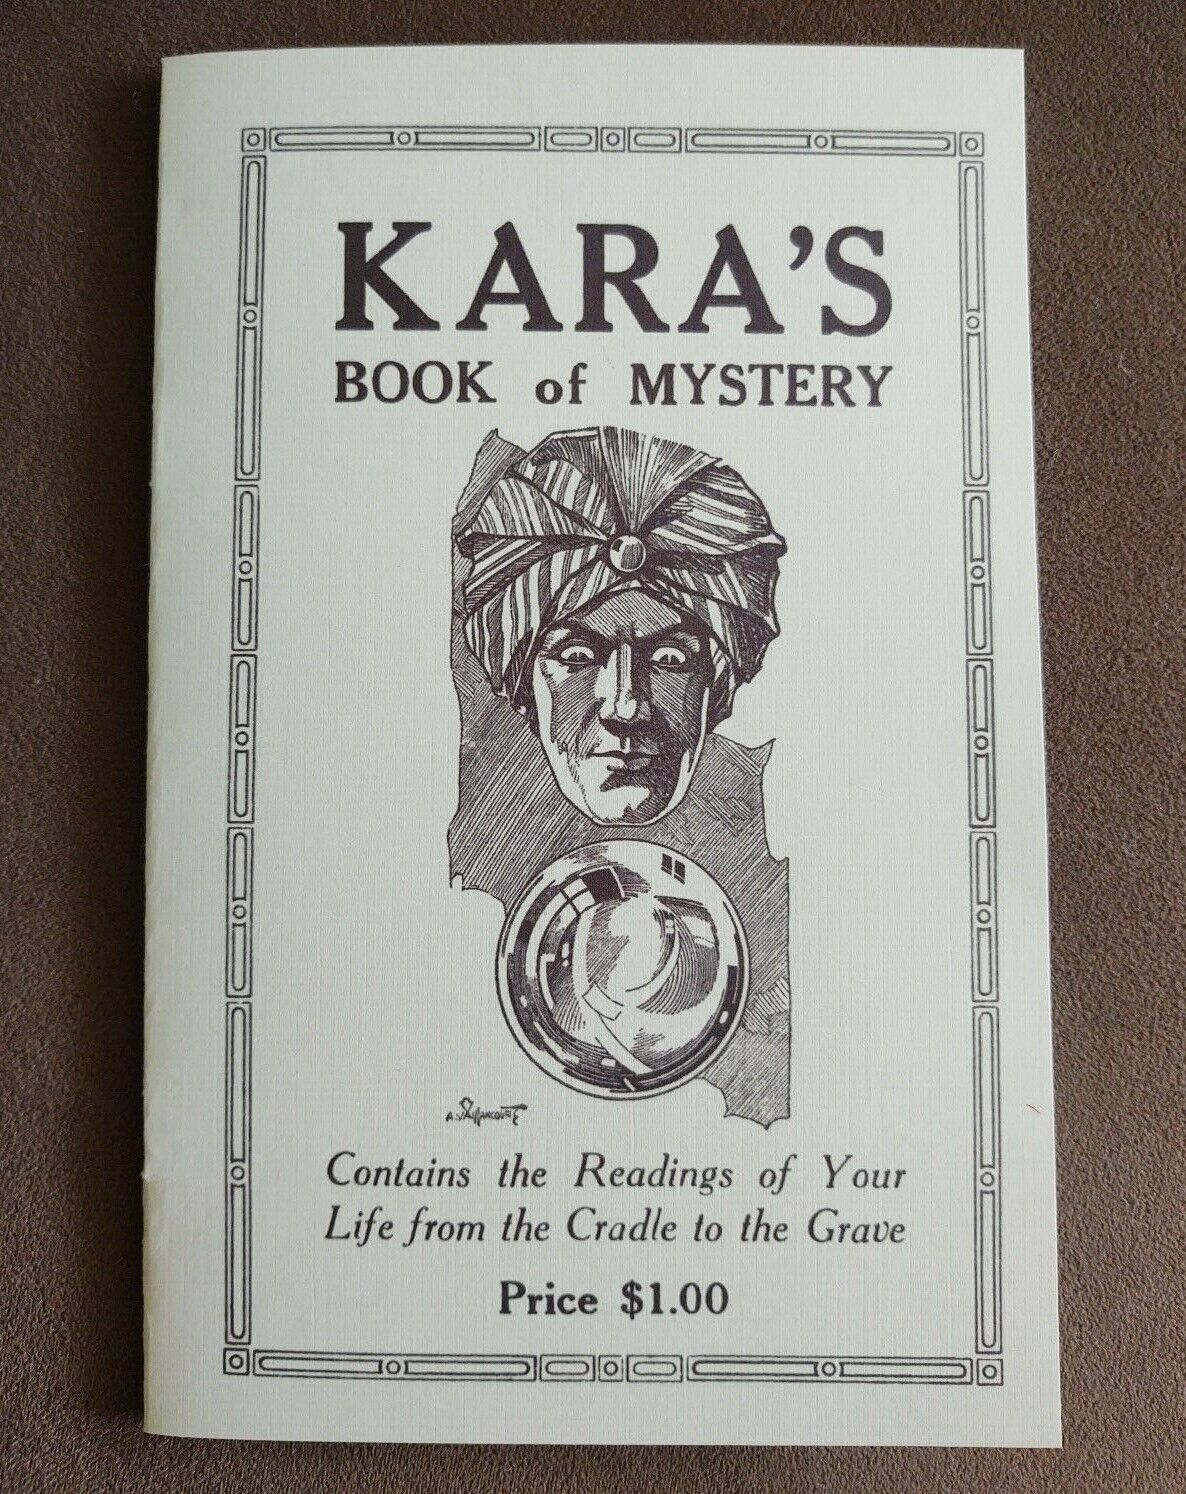 Kara's Book of Mystery (Readings of Your Life from Cradle to Grave)